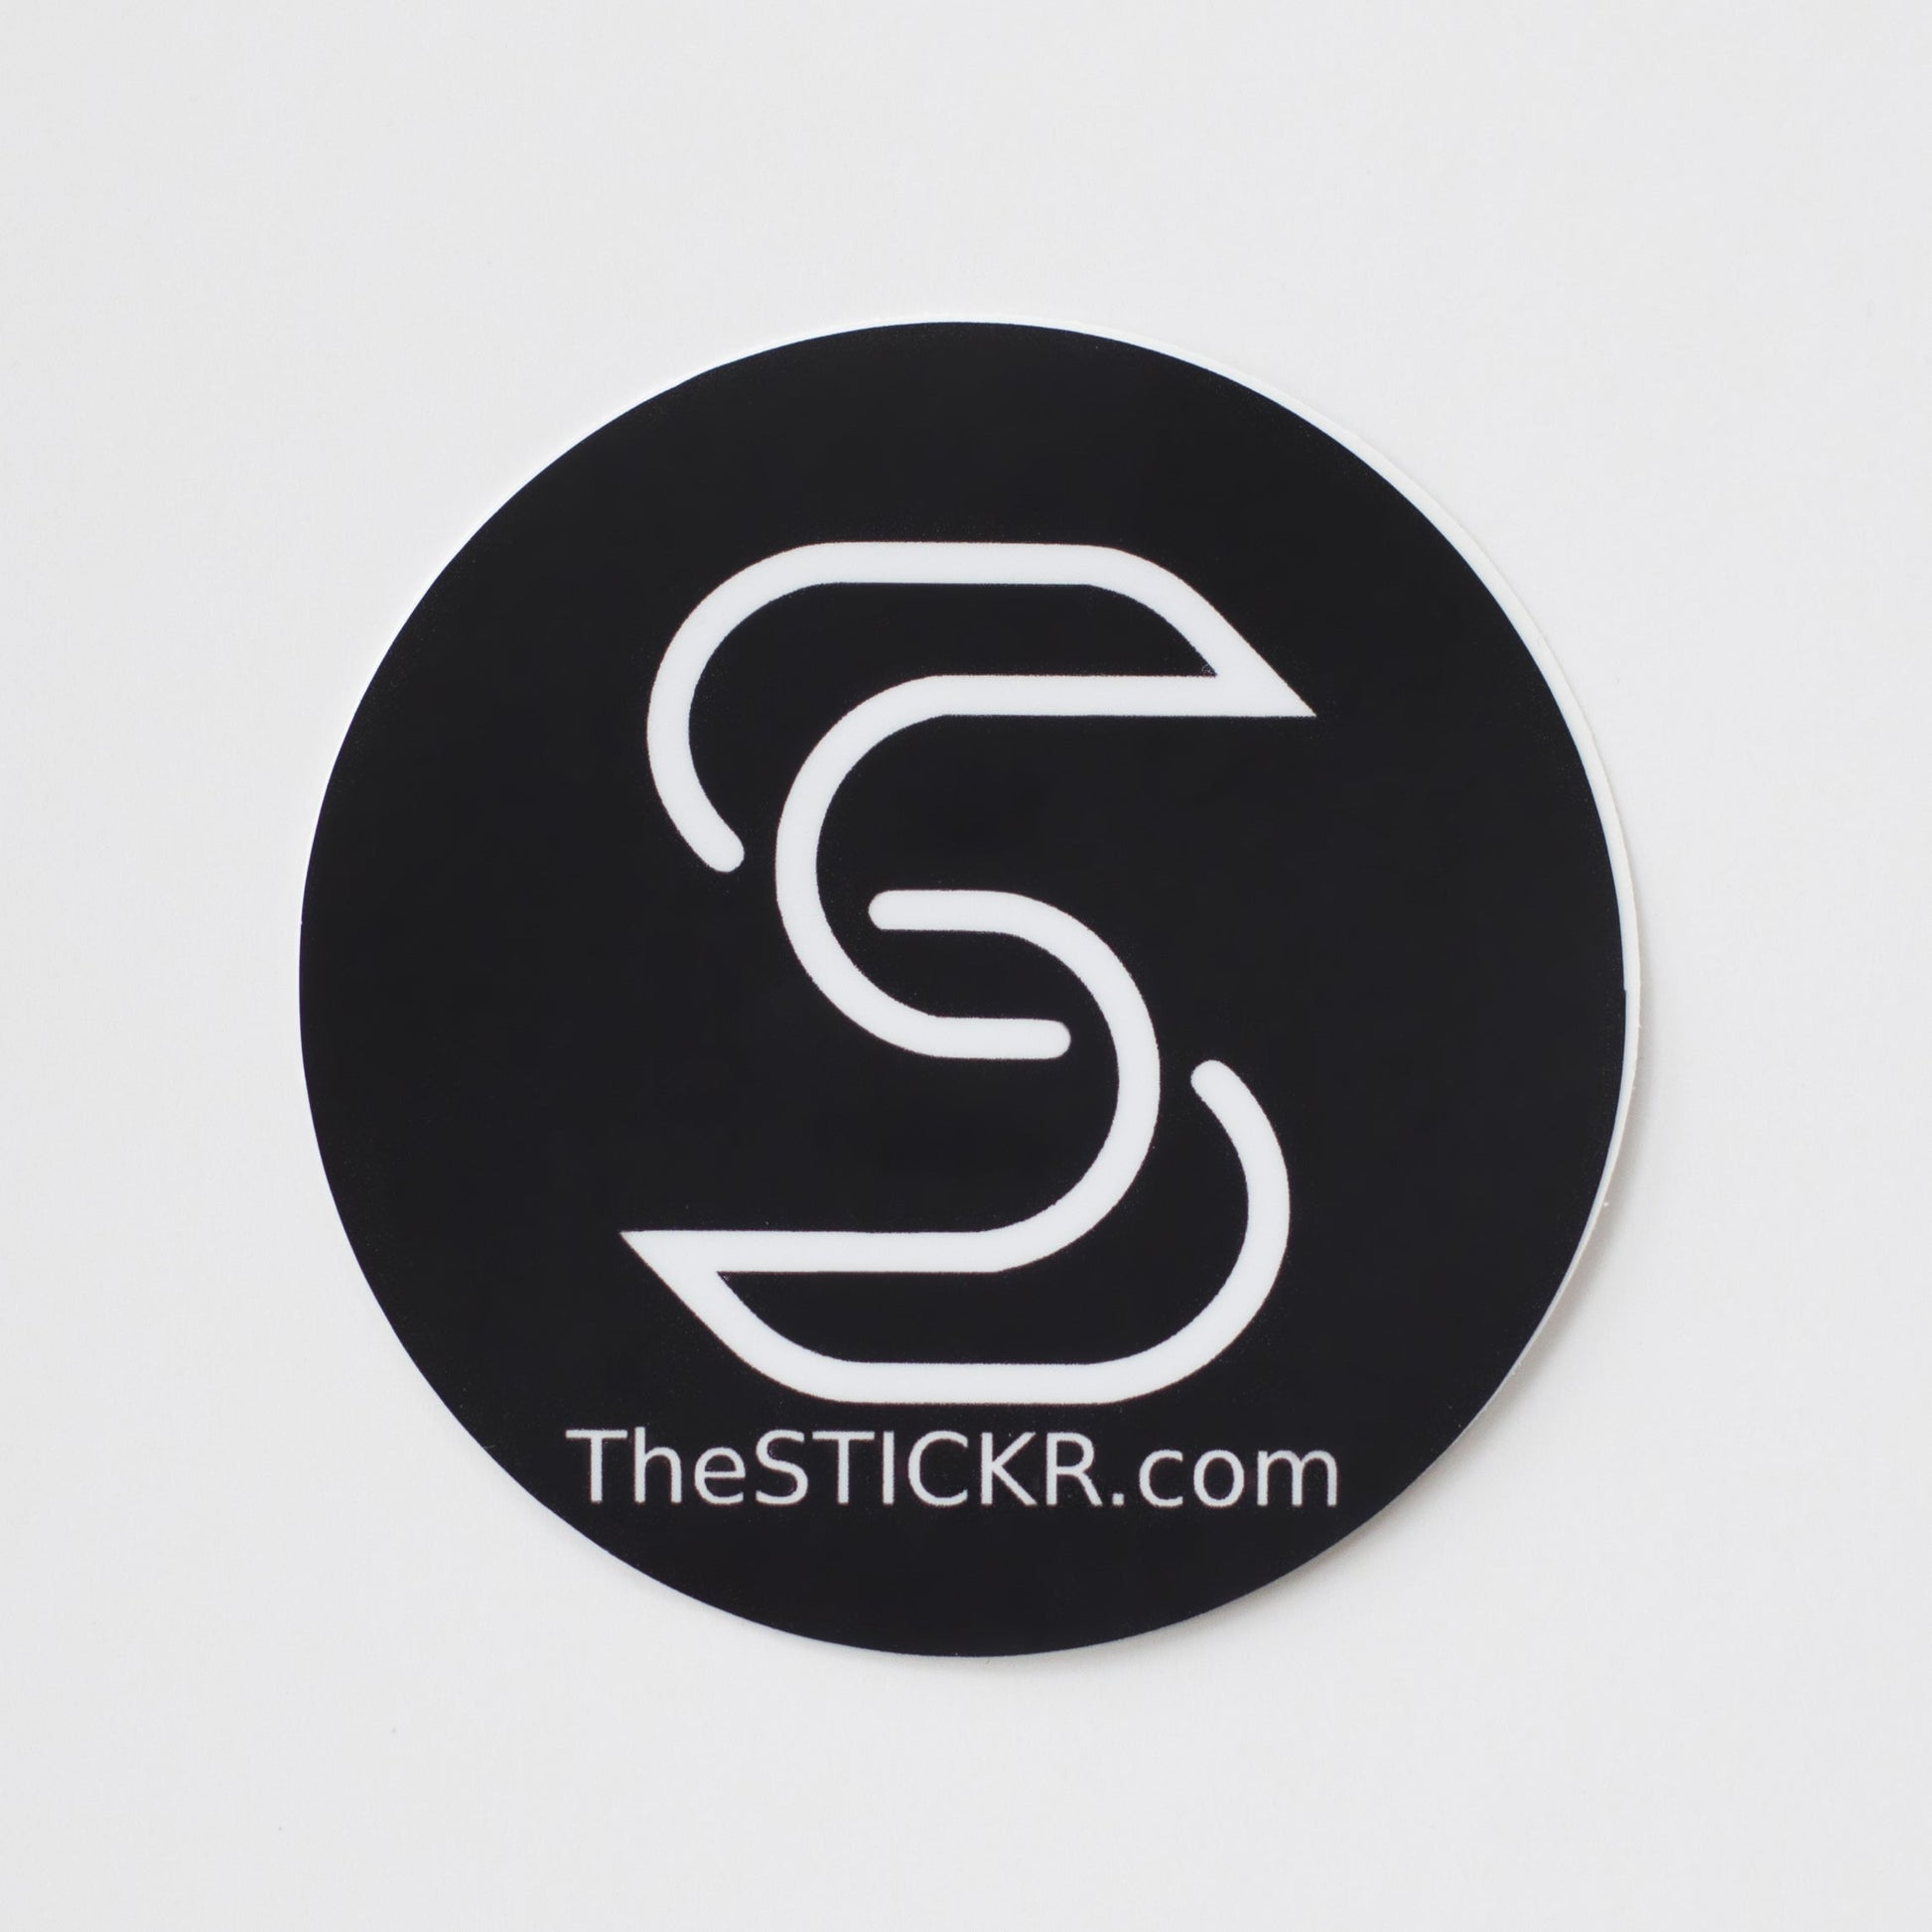 A circular vinyl sticker of the Stickr logo and website on a white backgorund